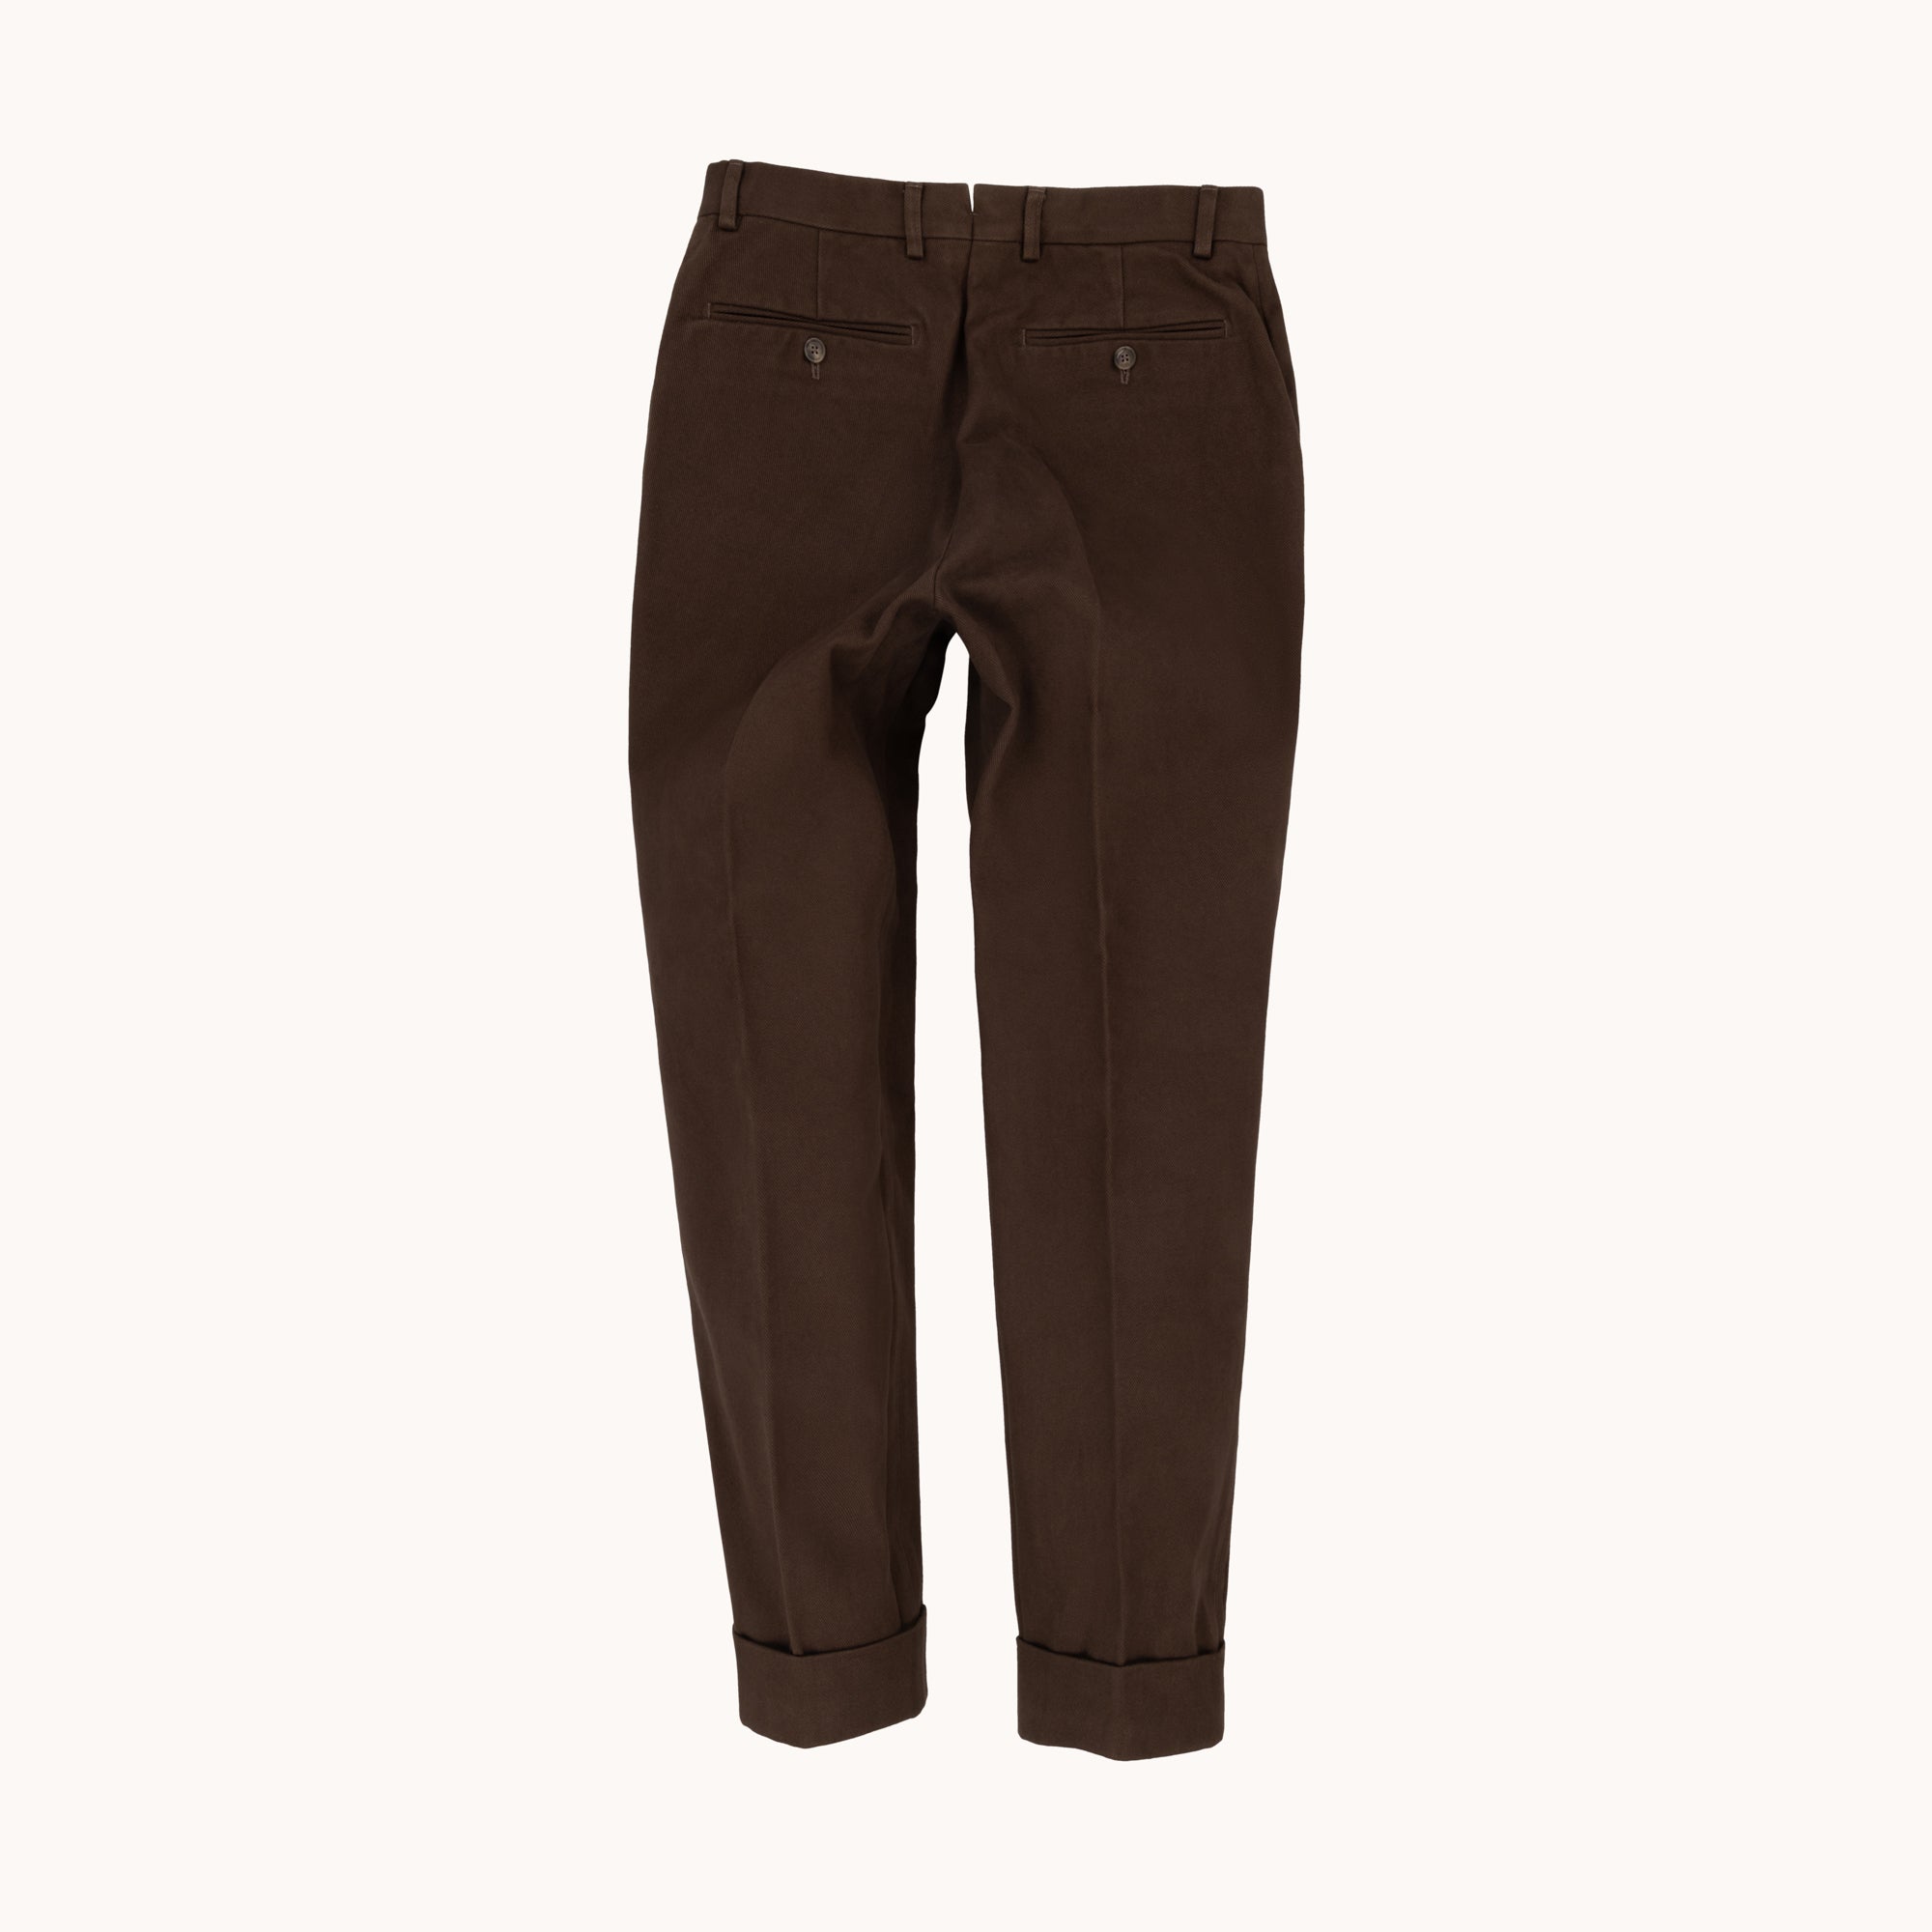 Garment Washed Flat Front Trouser - Brown Cotton Drill